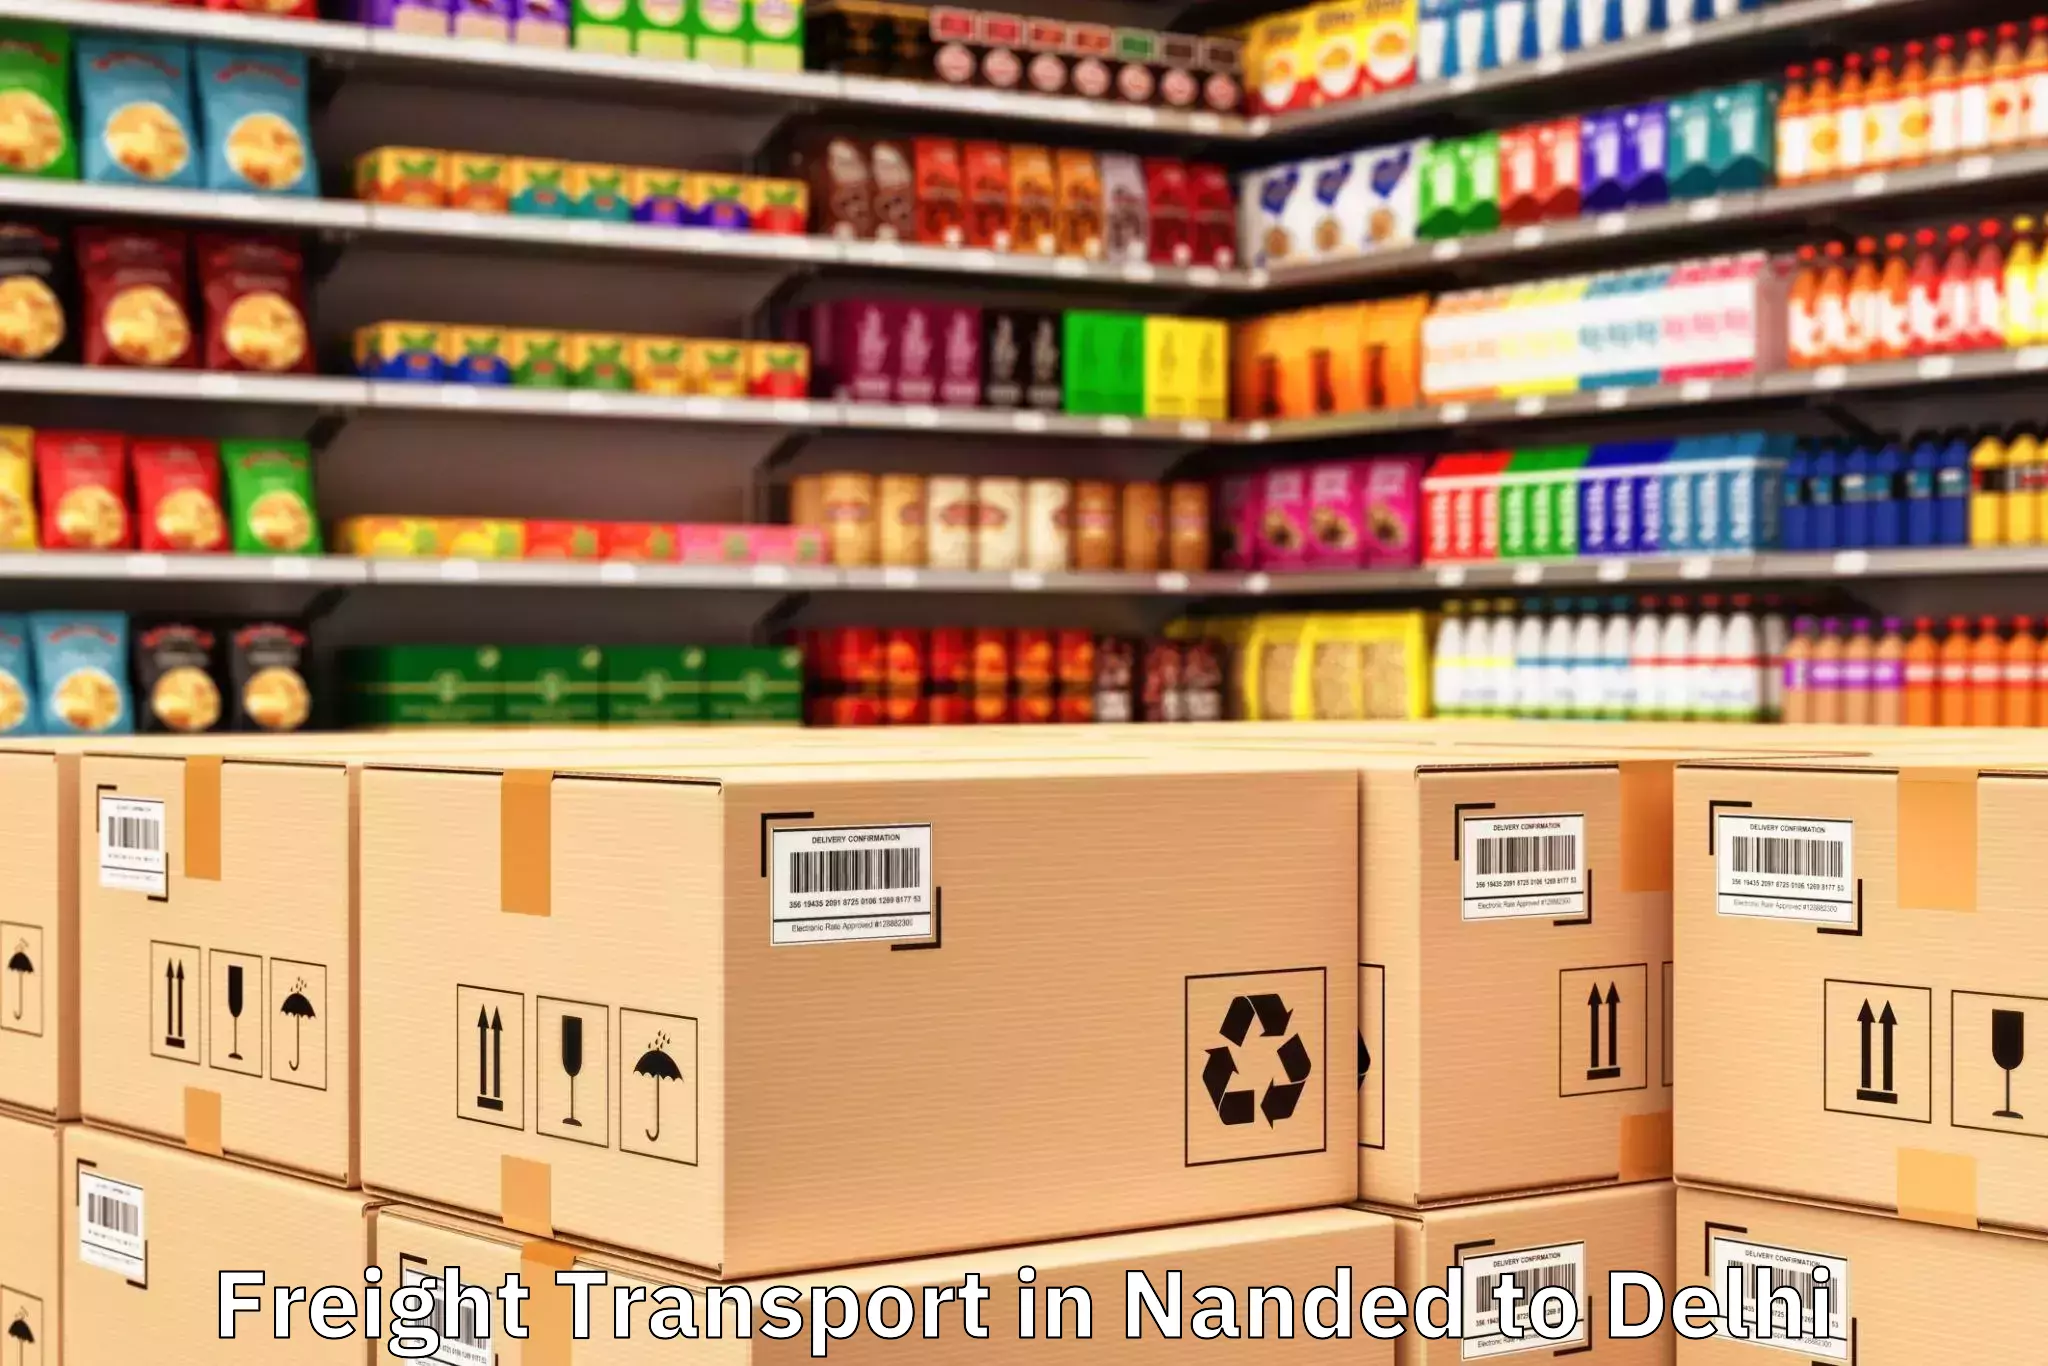 Affordable Nanded to Unity One Mall Janakpuri Freight Transport